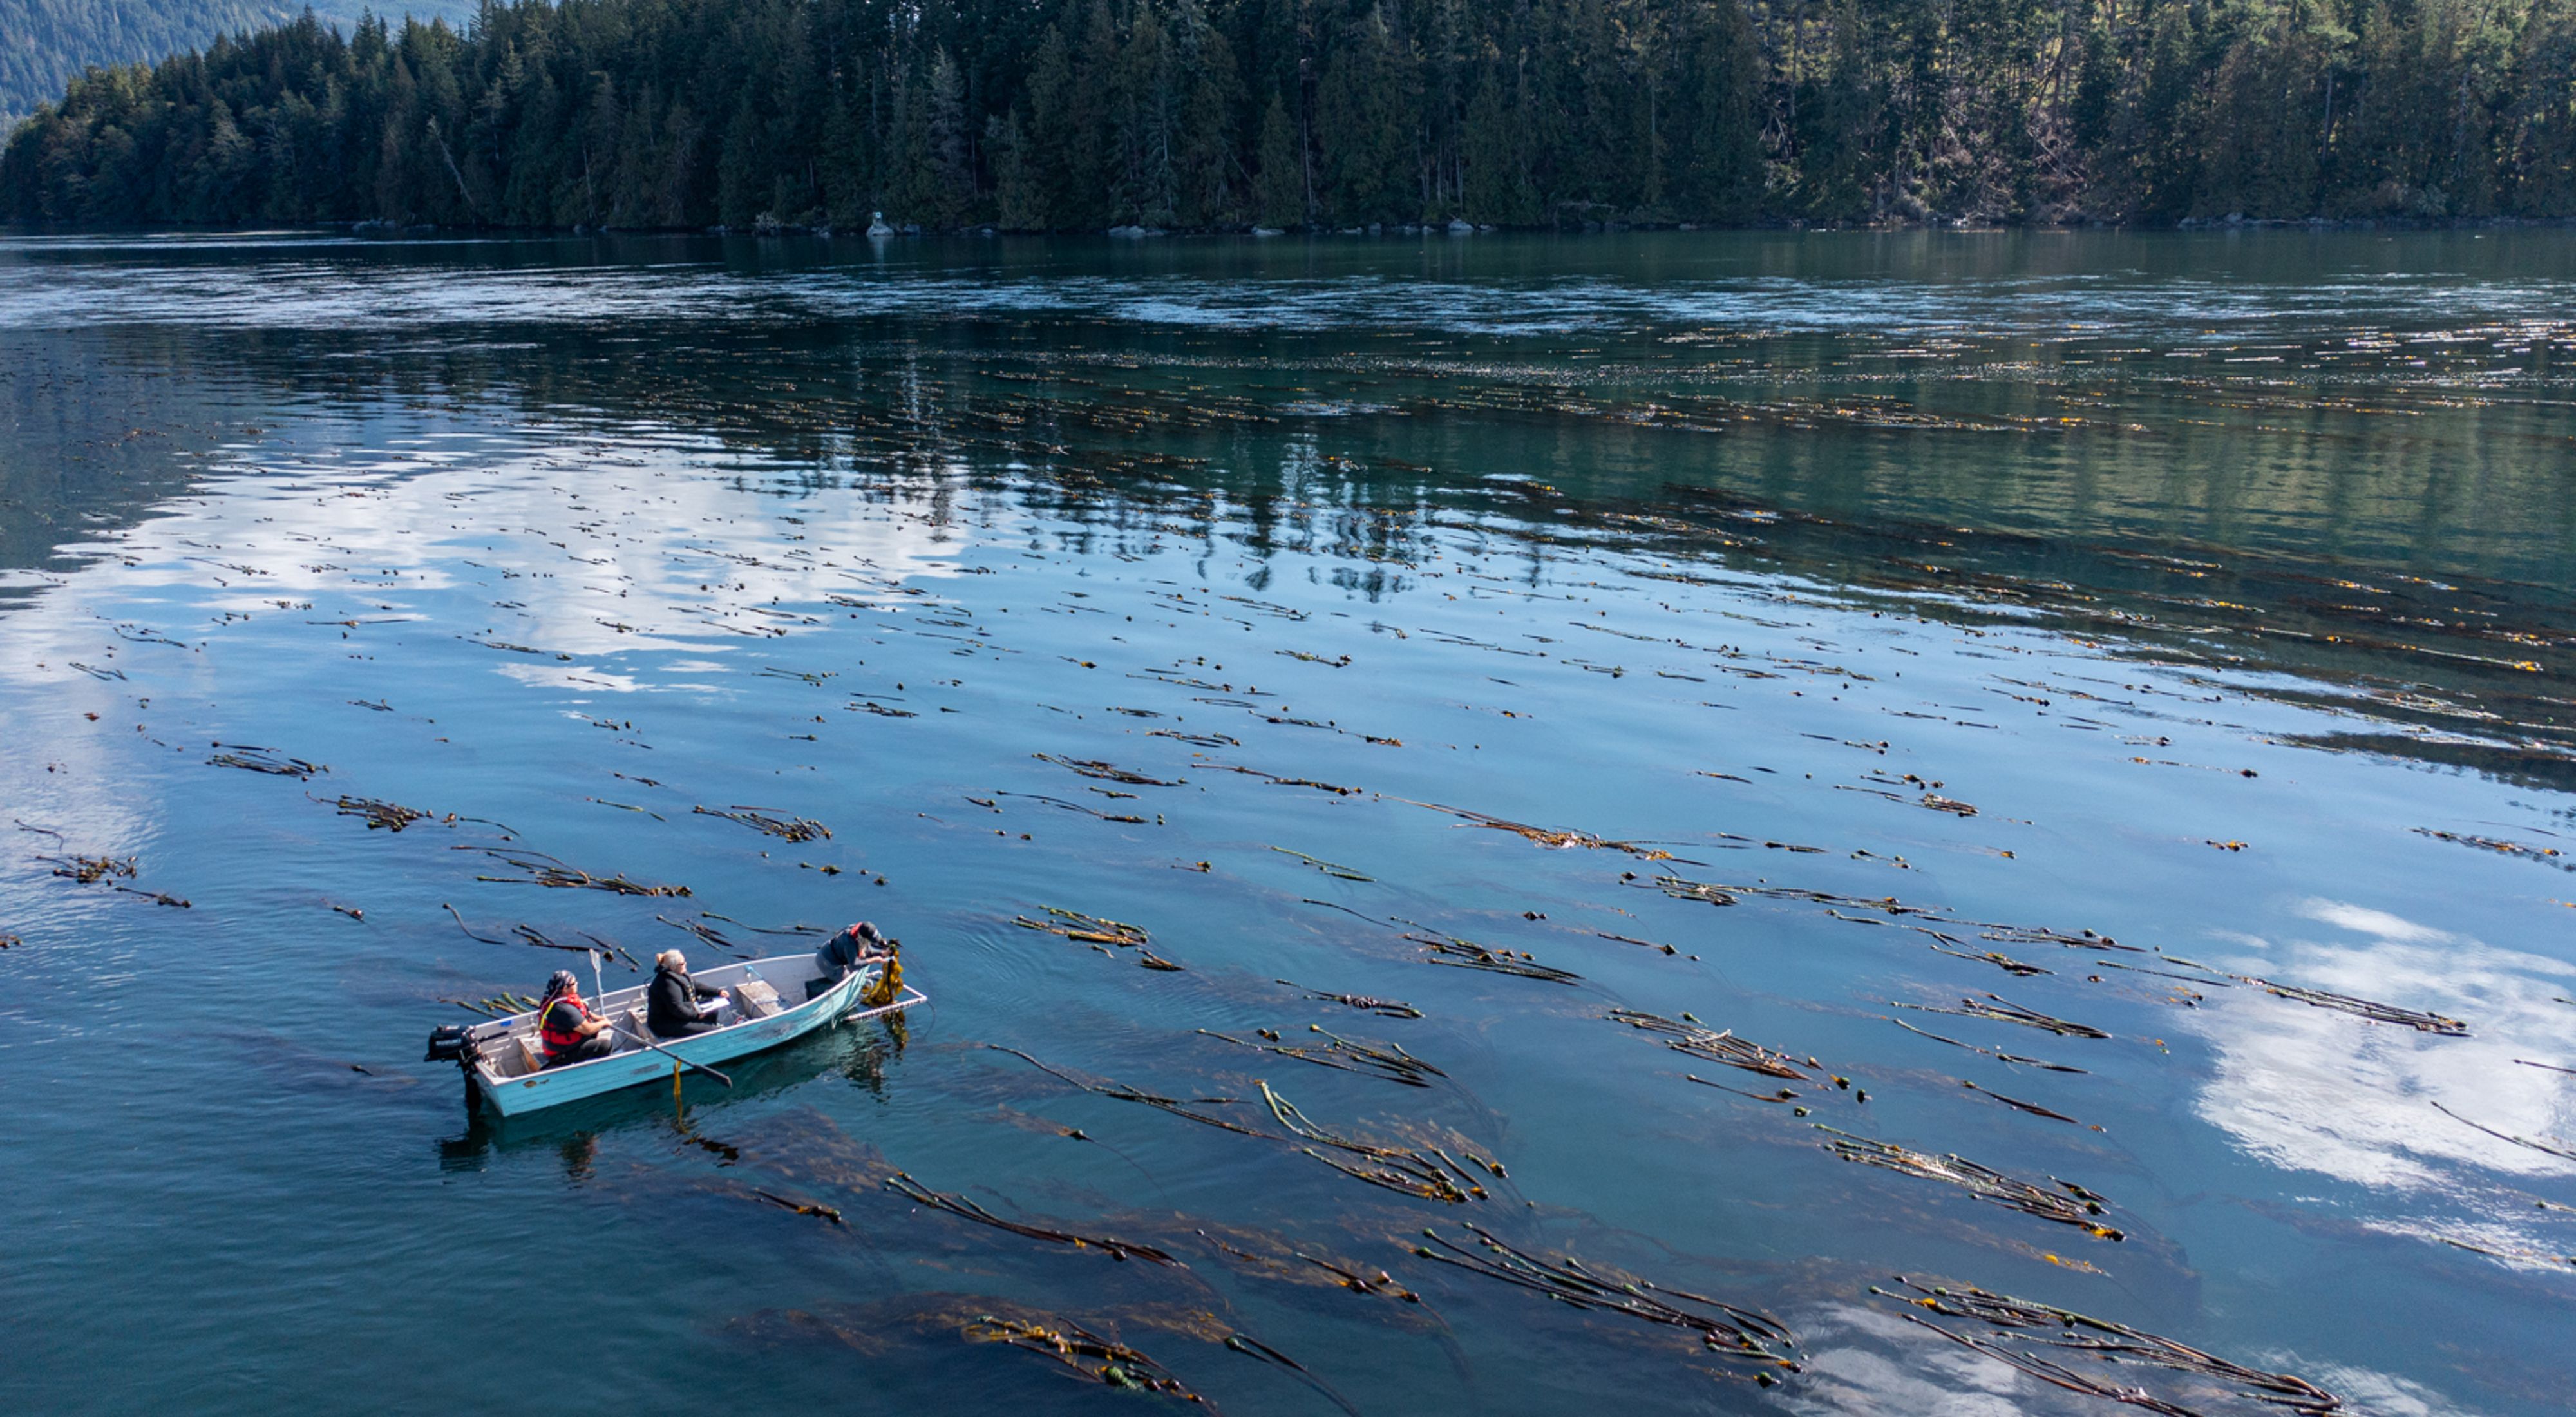 Three people in a boat at sea taking measurements of kelp.